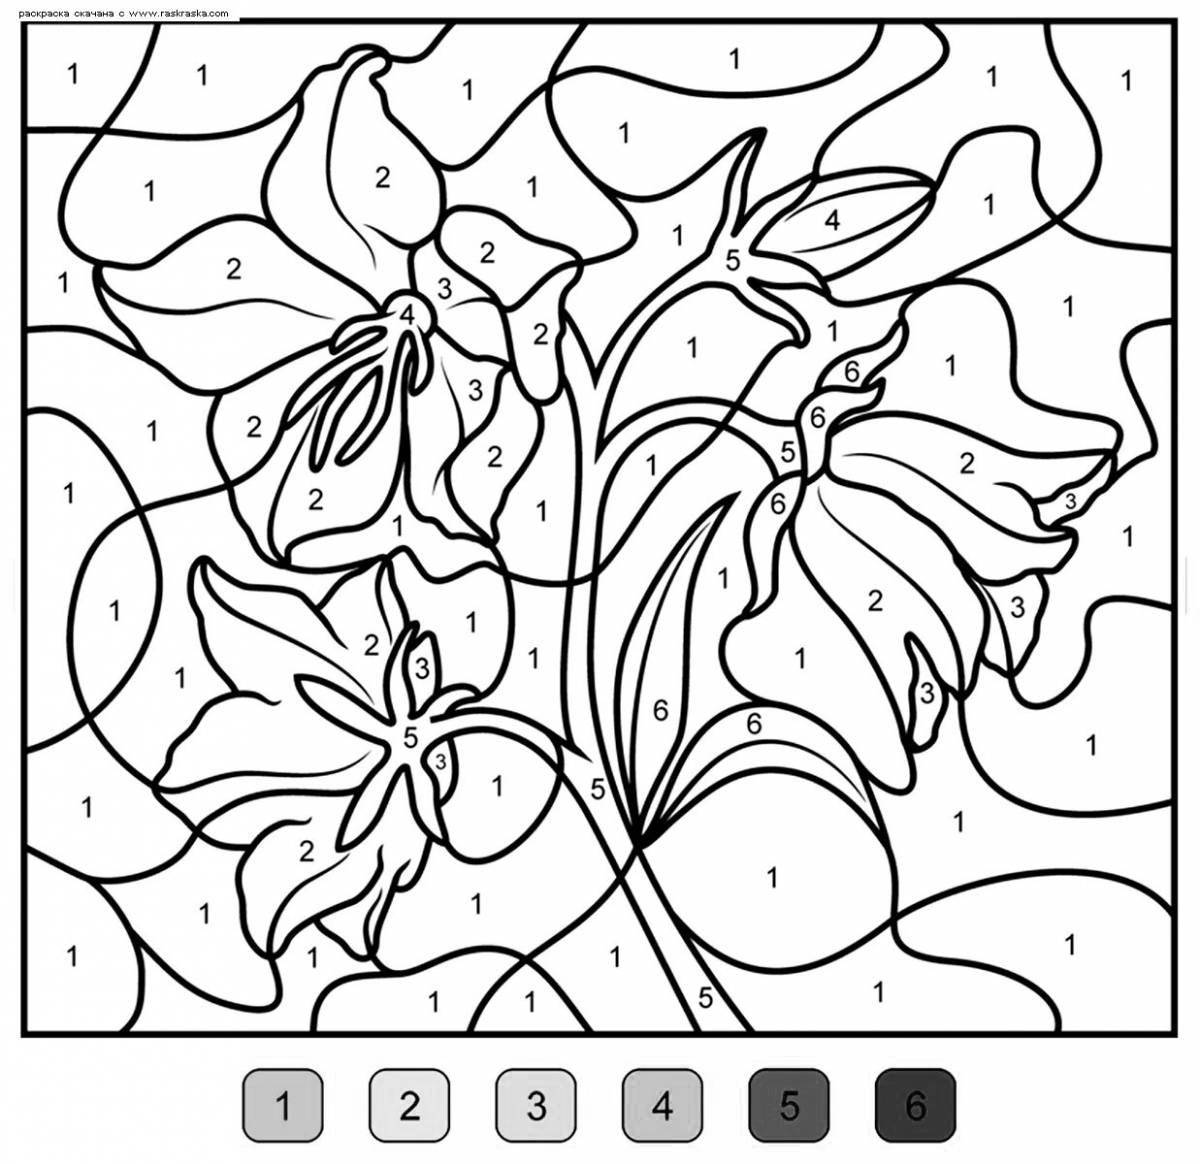 Fancy coloring without paint by numbers